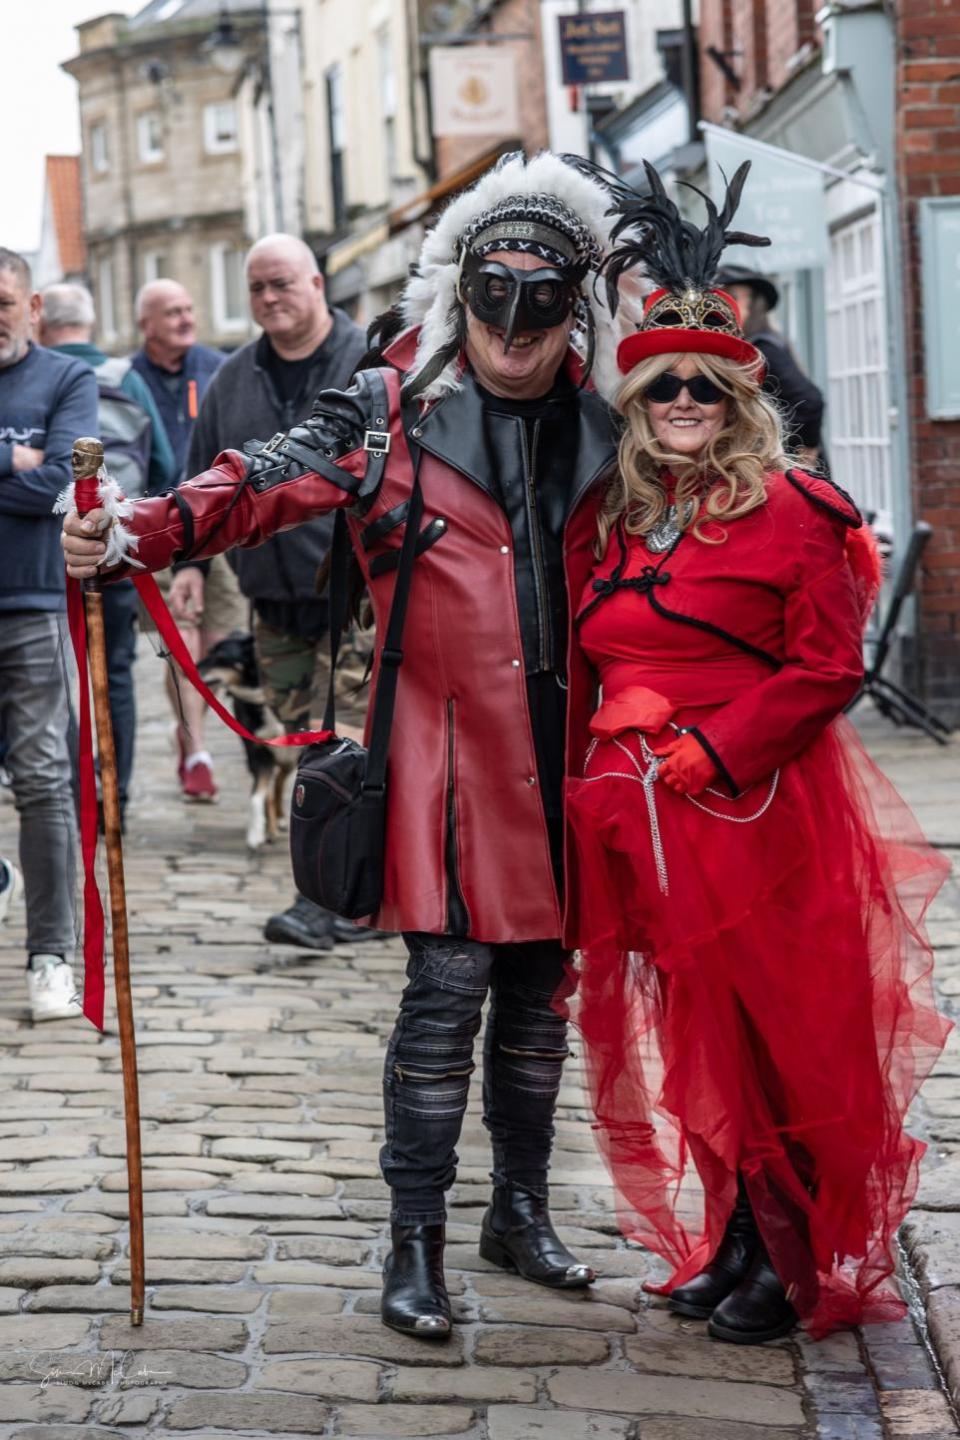 York Press: Goths smile for the camera during the festival in Whitby